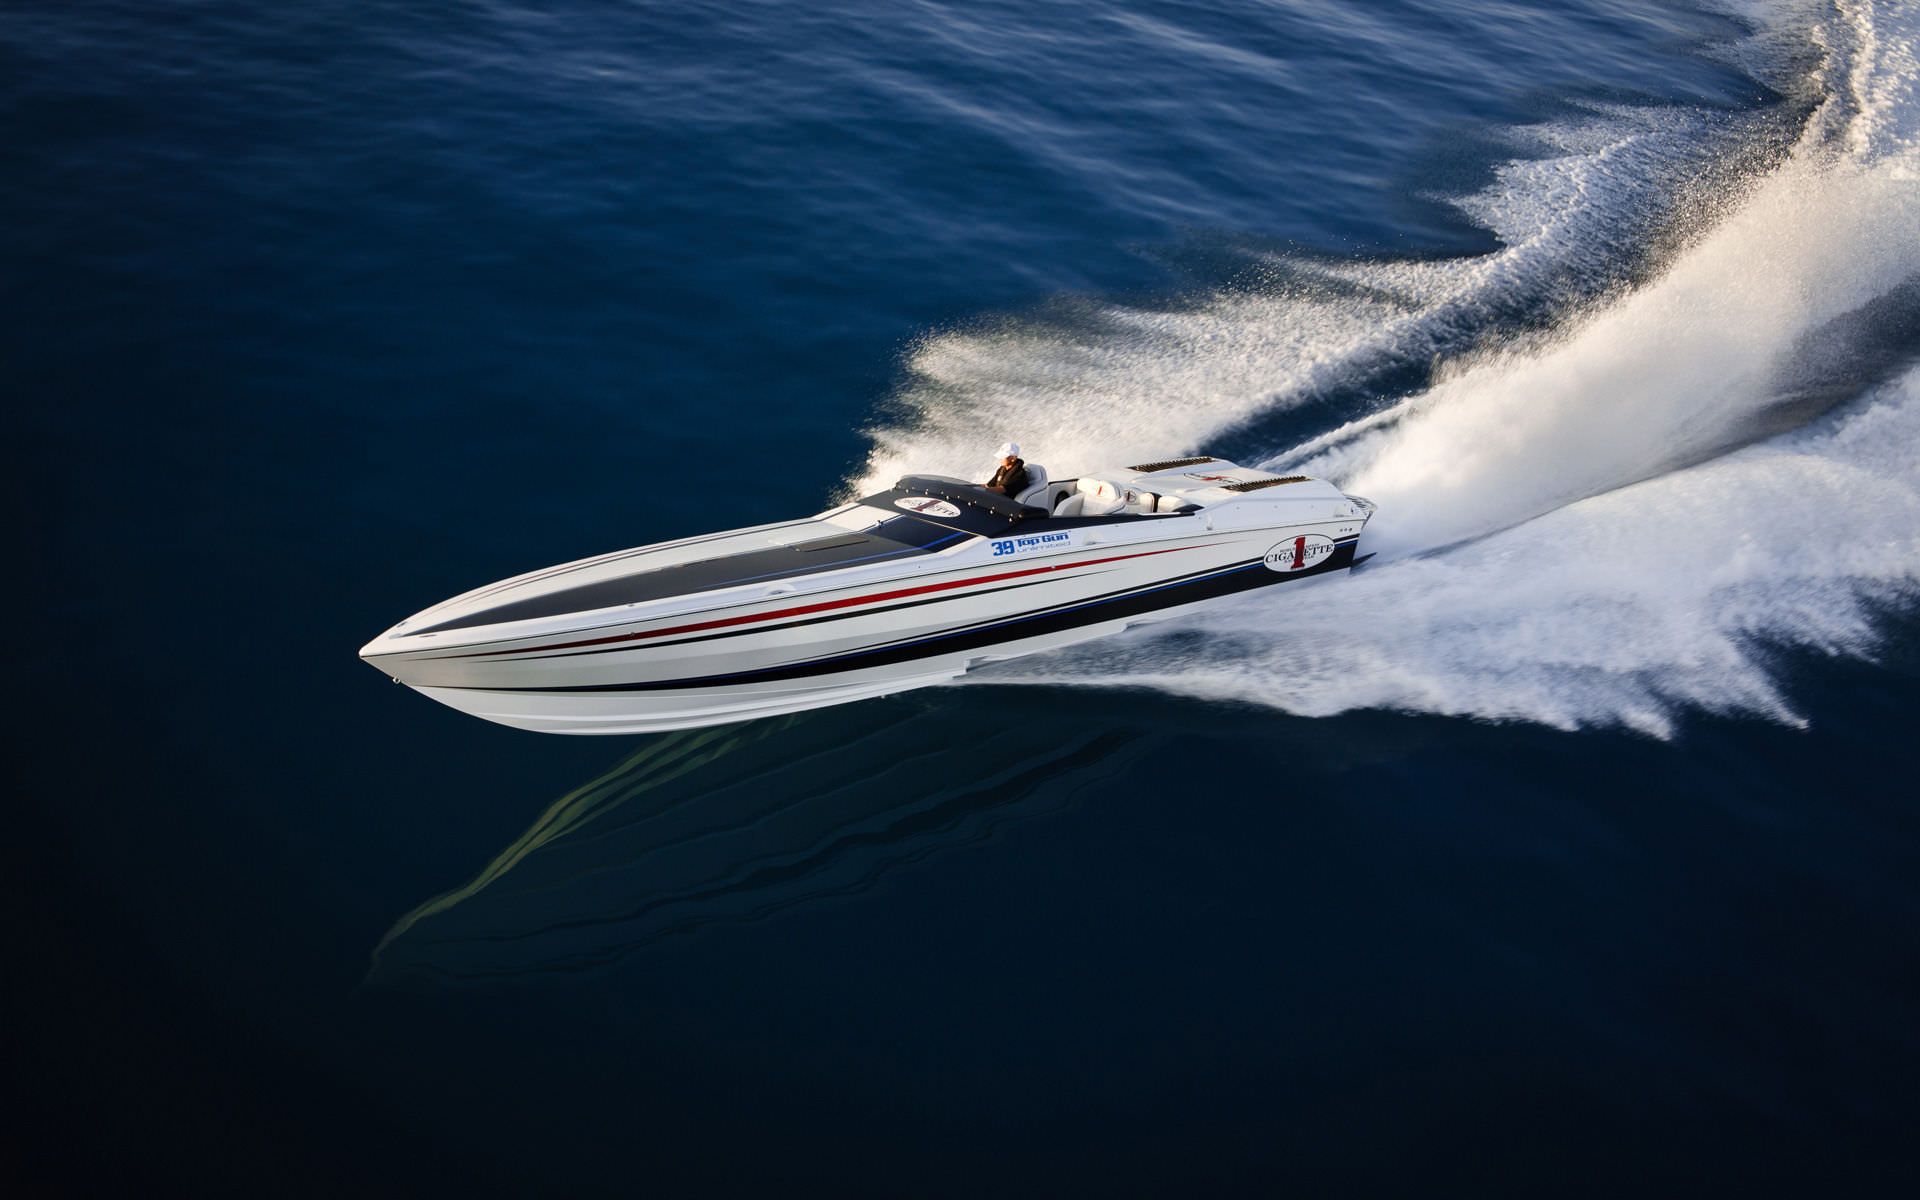 Speed Boats Wallpaper. Old Boats